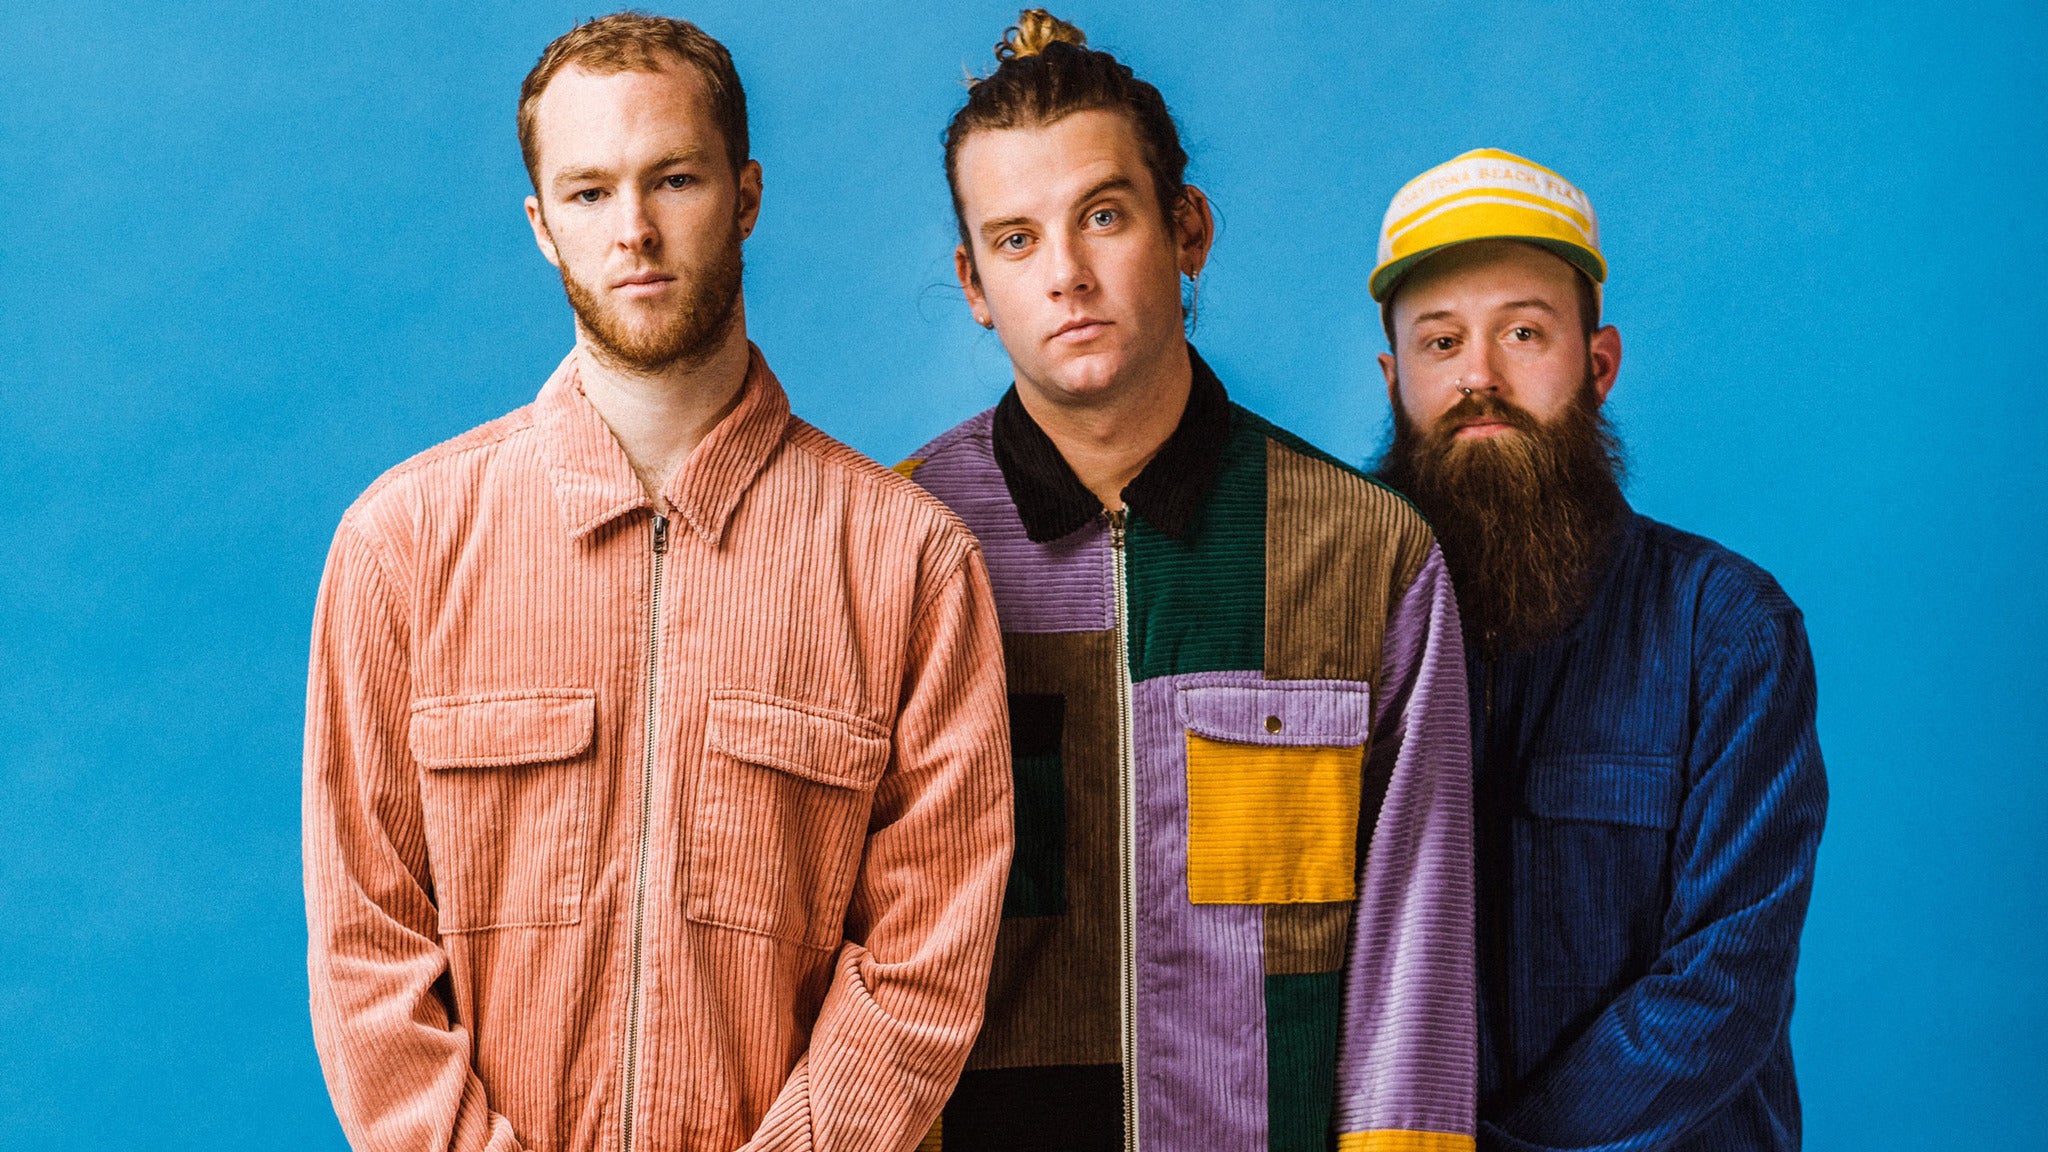 Judah & the Lion - Going to Mars Tour in Raleigh promo photo for Spotify presale offer code